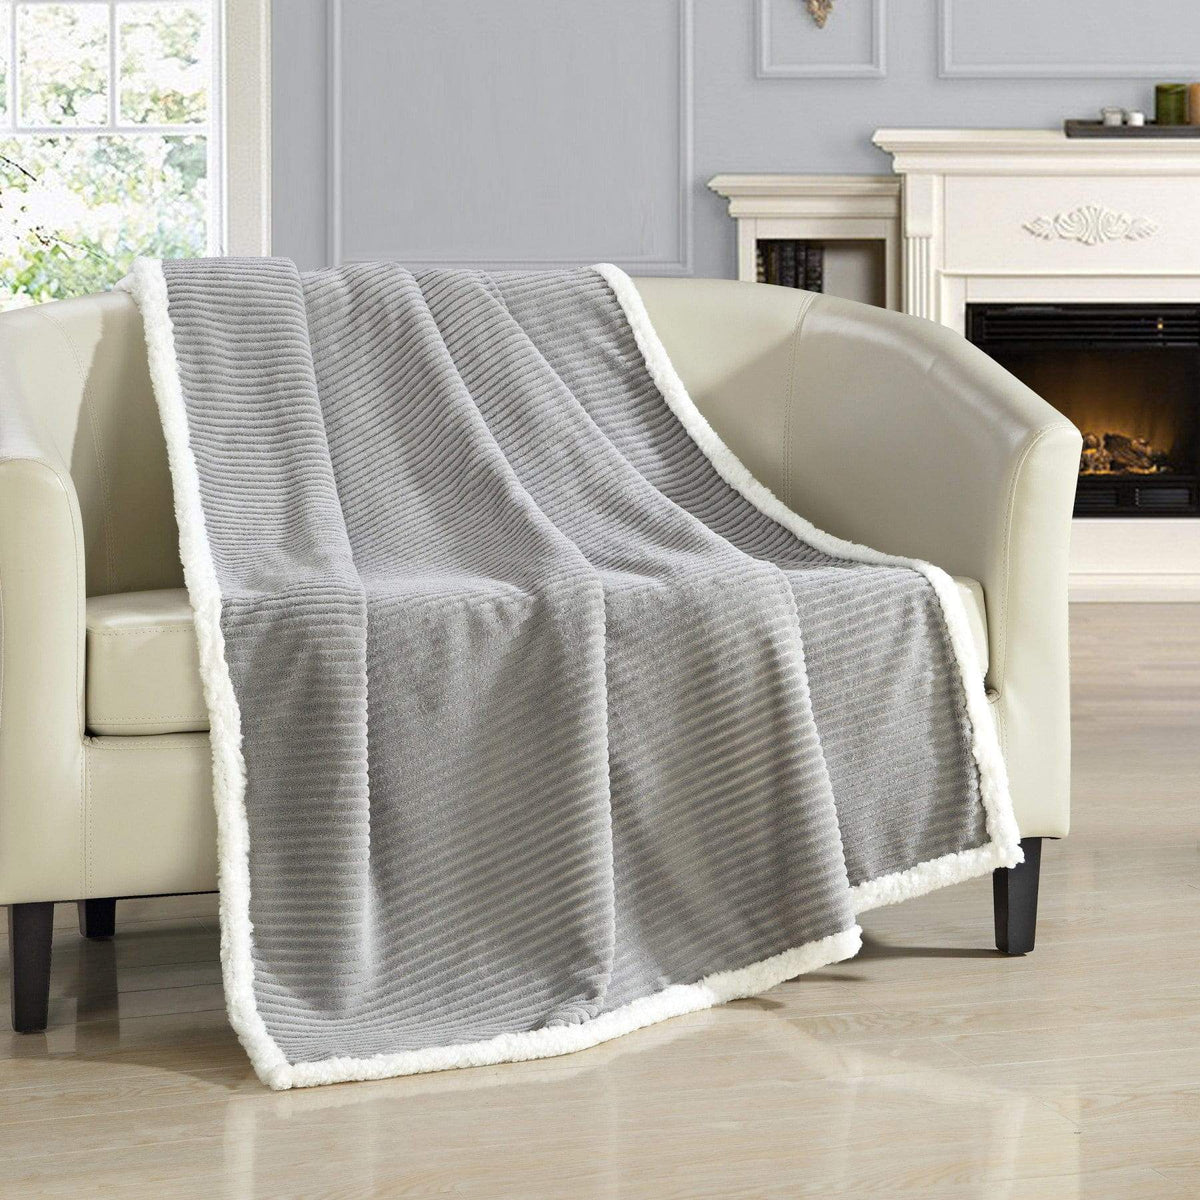 Chic Home Bern Micro Mink Sherpa Lined Throw Blanket Grey